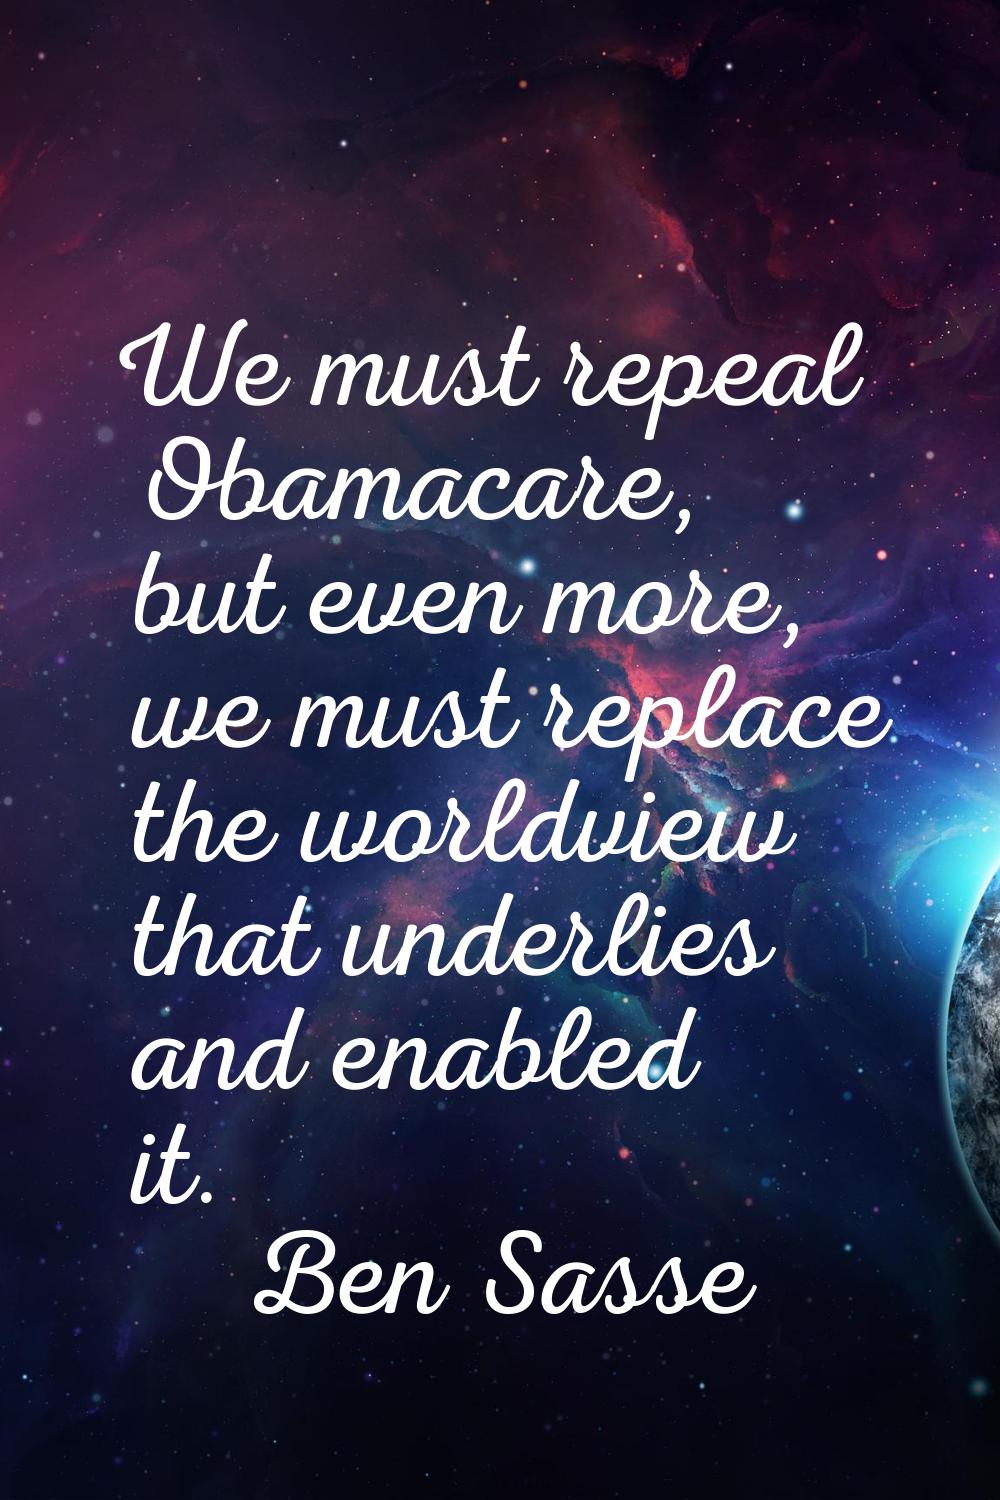 We must repeal Obamacare, but even more, we must replace the worldview that underlies and enabled i